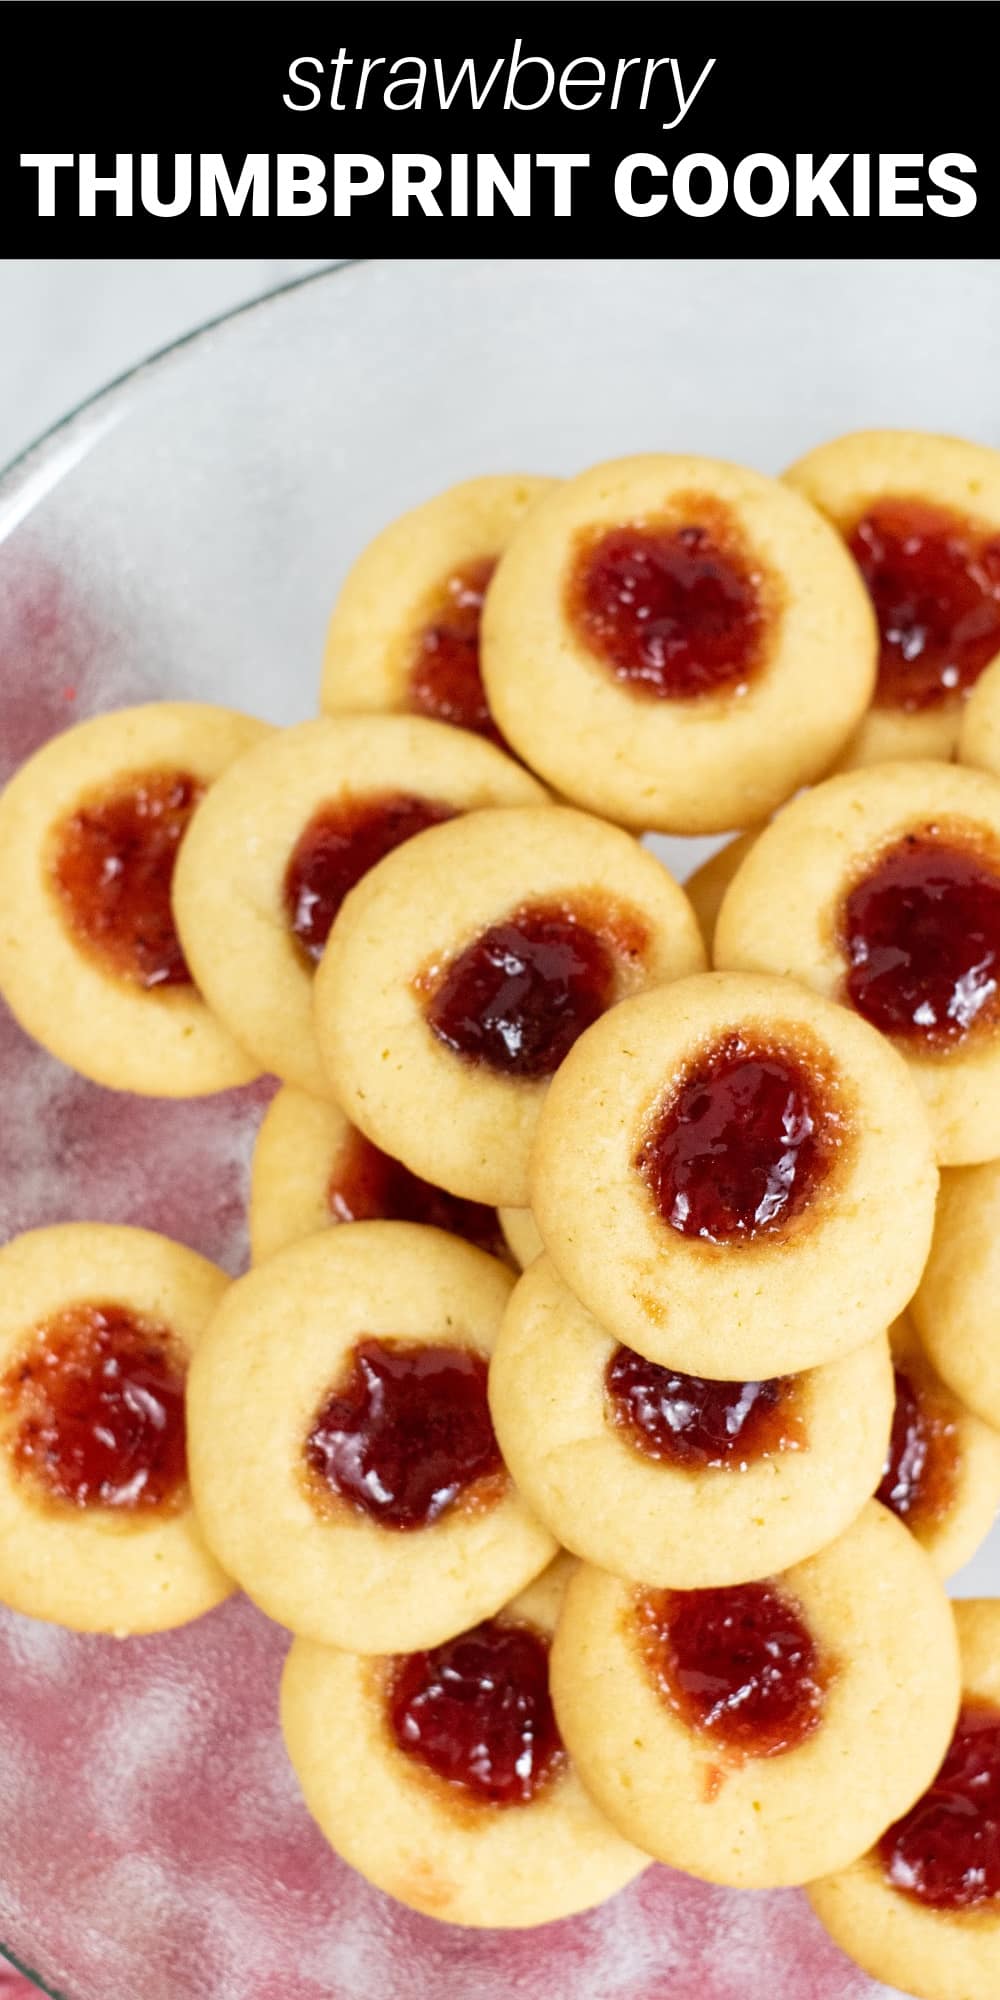 This completely irresistible Strawberry Thumbprint Cookie Recipe makes the most delicious, buttery, classic Christmas cookie with a beautiful, sweet strawberry jam center. They’ll add the perfect festive touch to all your cookie trays this holiday season.